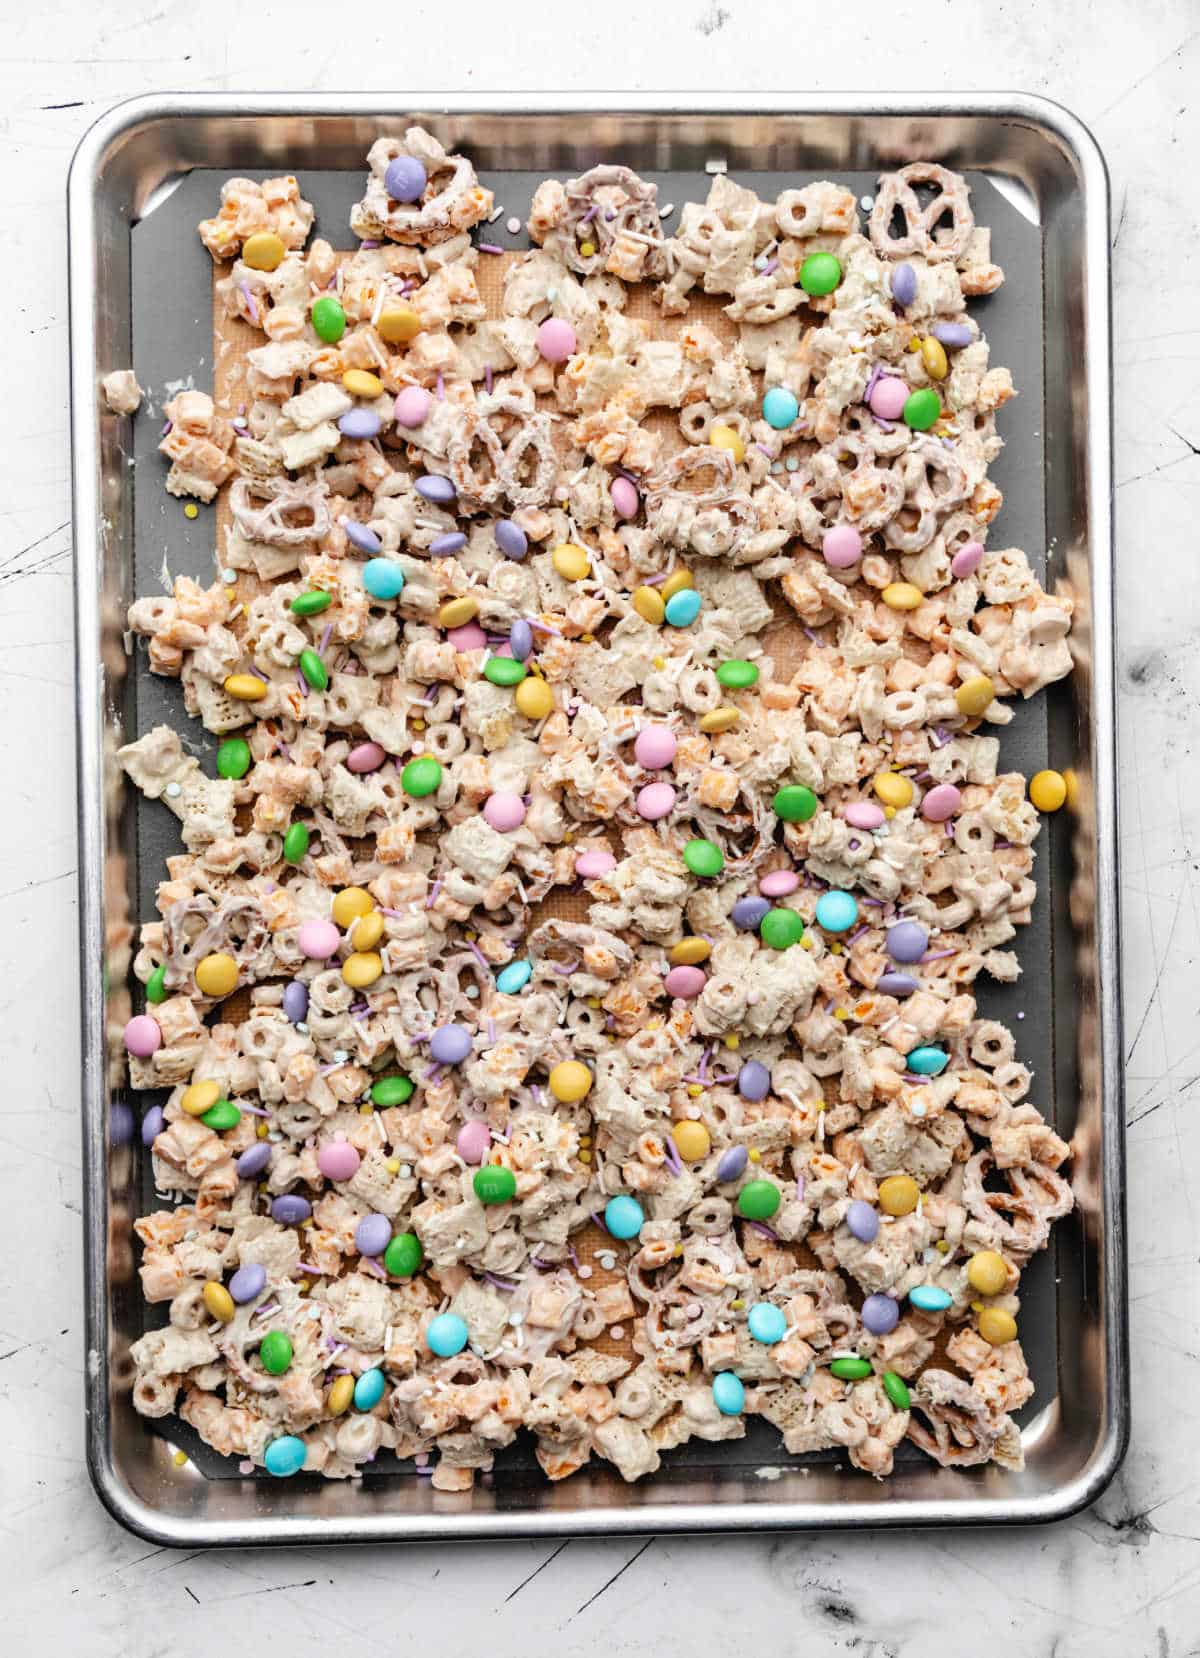 Sprinkles and M&Ms on top of white chocolate cereal mixture. 